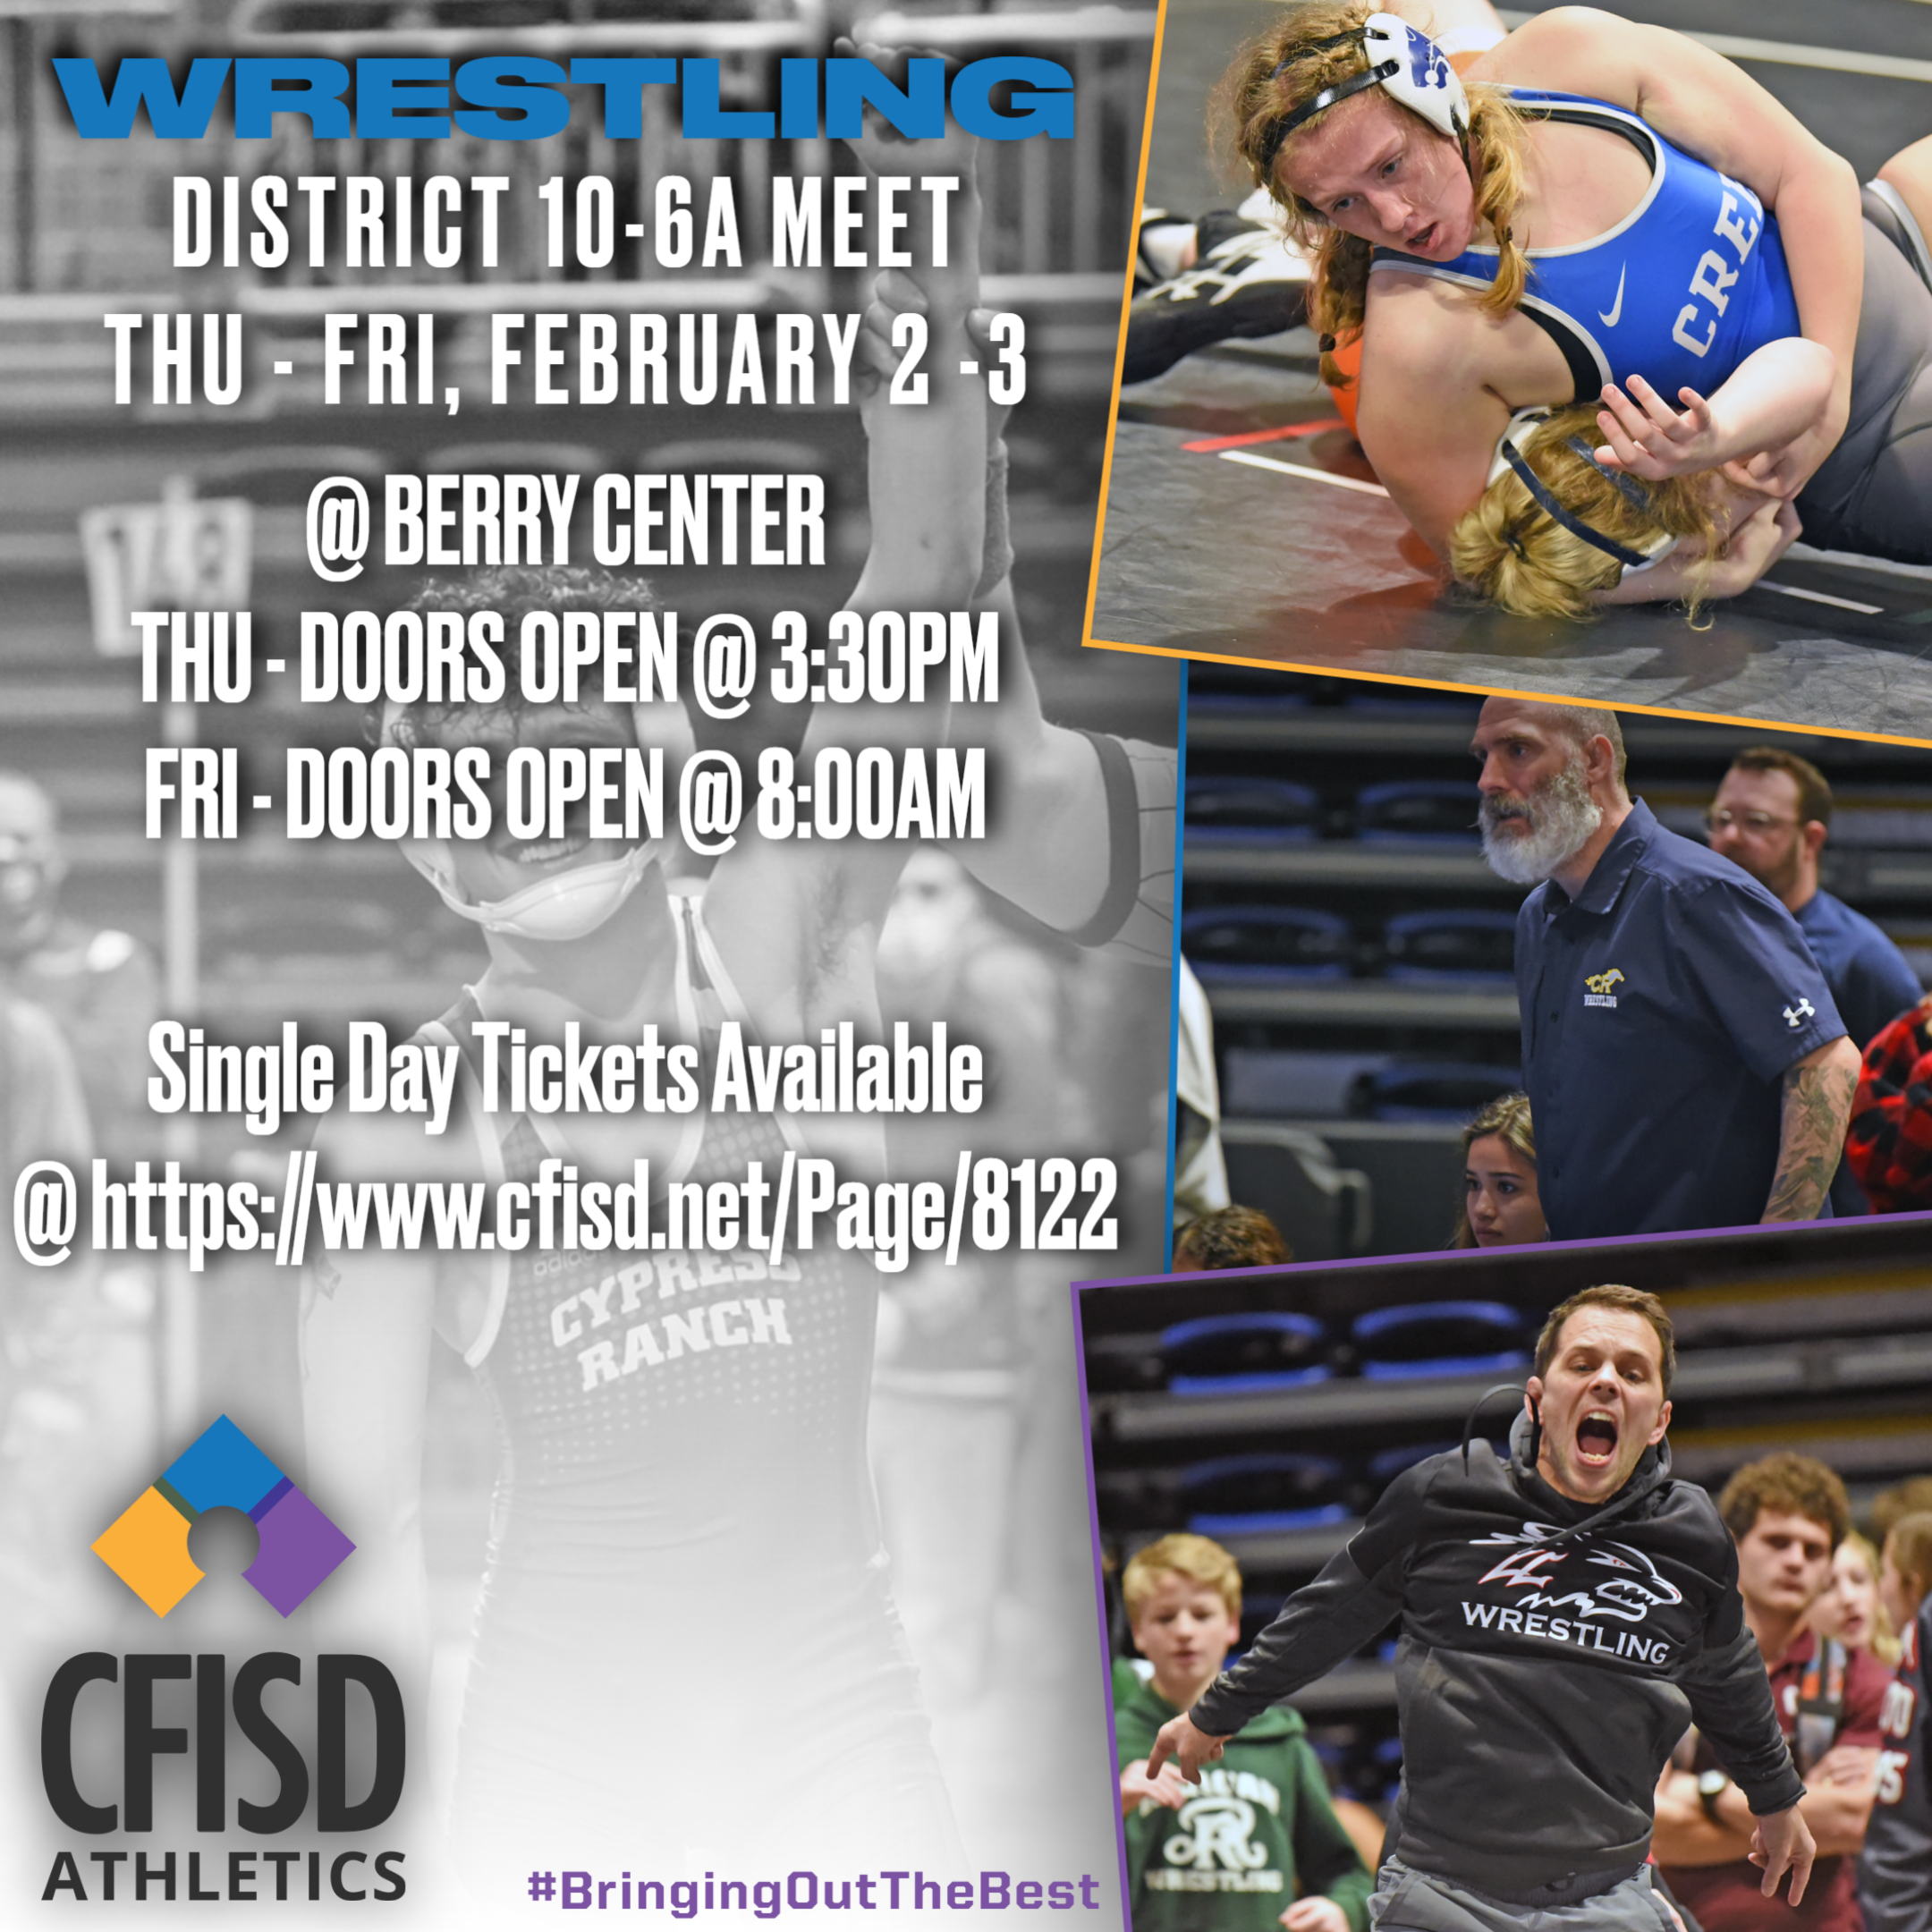 The 2023 District 10-6A Wrestling Tournament will be held at the Berry Center on February 2 & 3, 2023. Doors will open at 3:30 PM on Thursday, and matches are expected to run until 7:30 PM. On Friday, doors will open at 8:00 AM and remain open until the District Champions are announced.